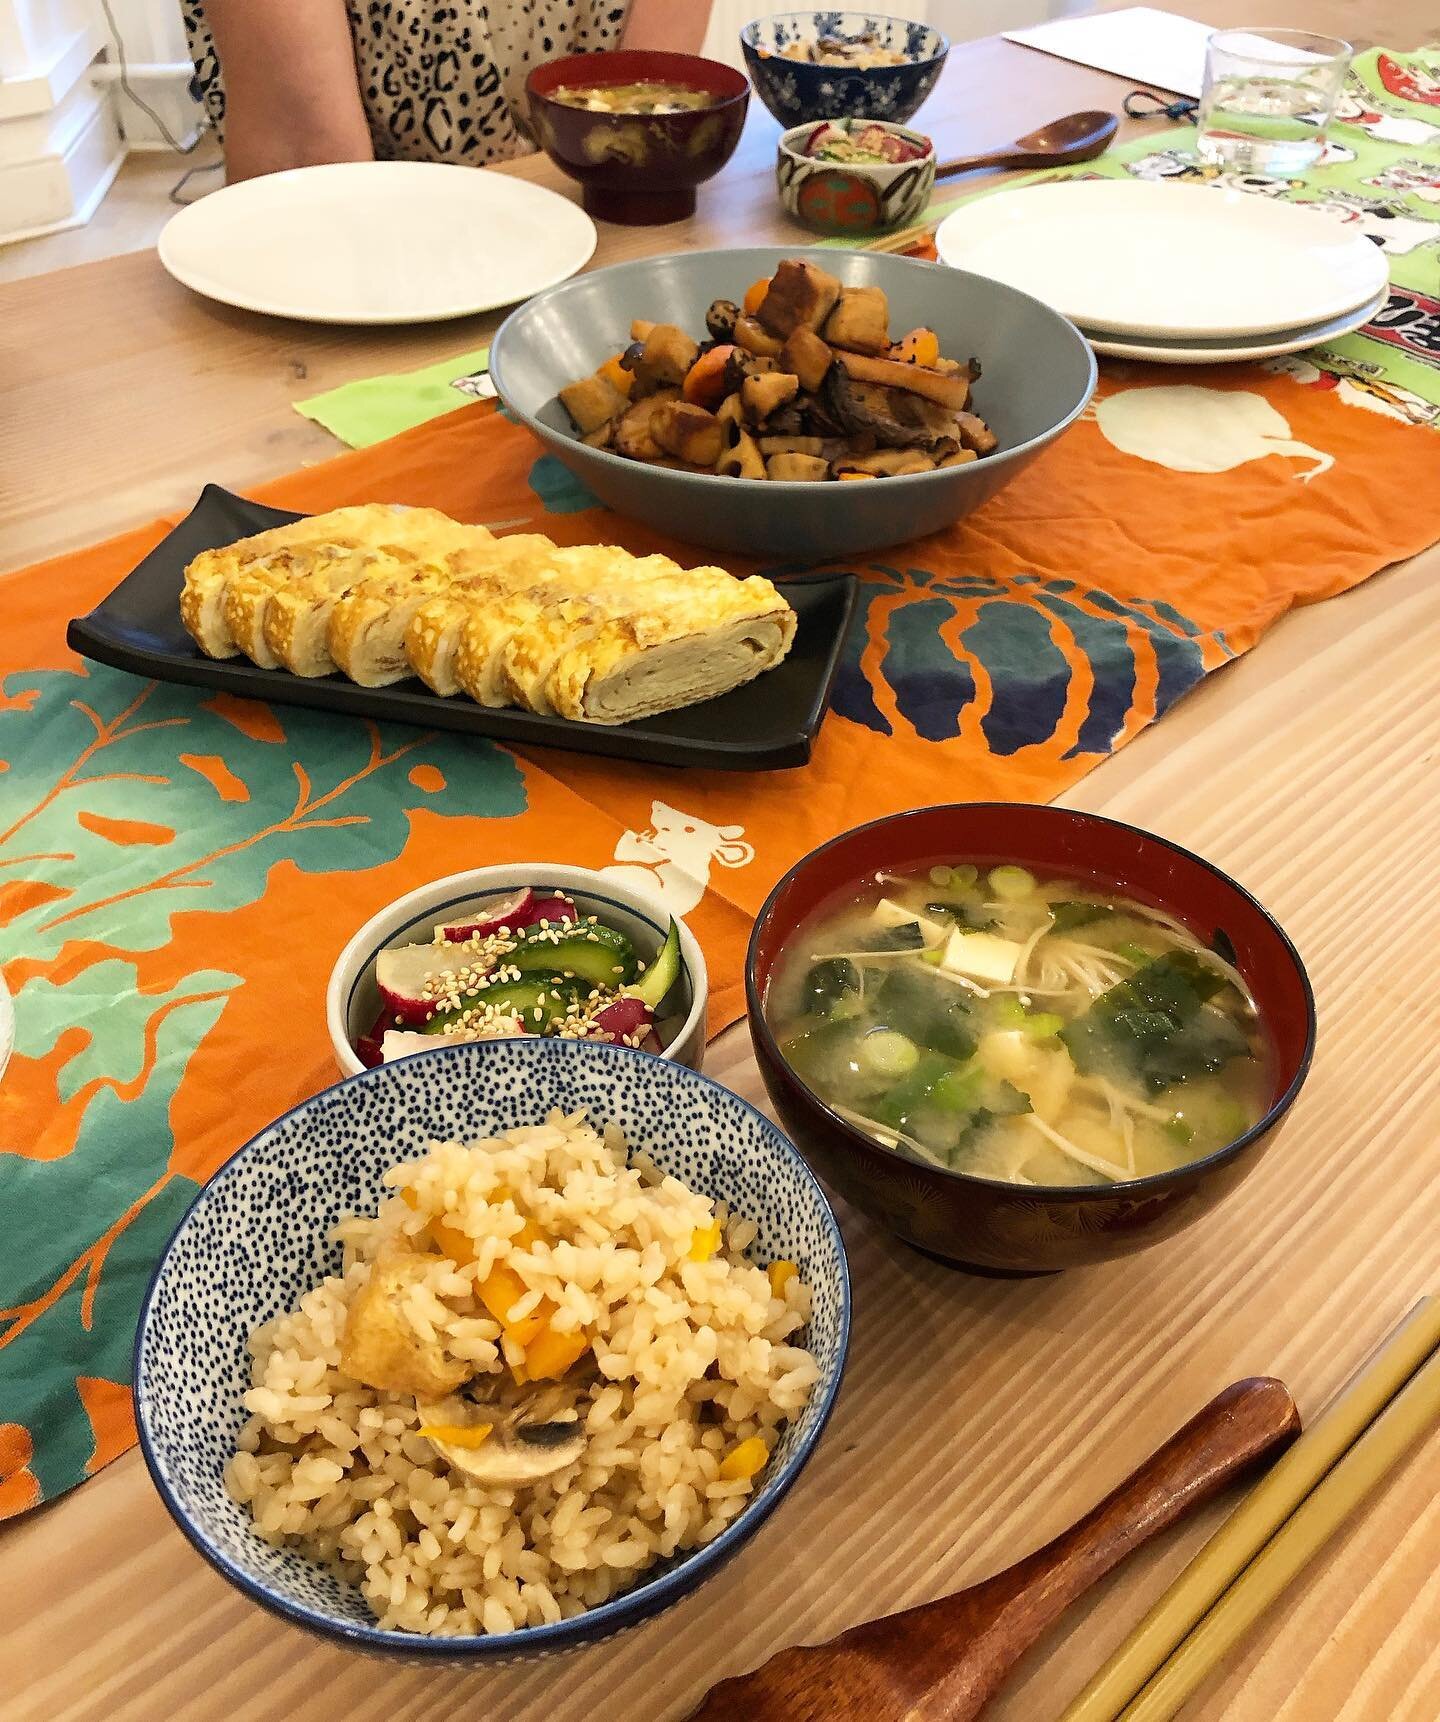 This is definitely my favorite type of comfort meal I never get bored 🤗💕Each dishes are very common Japanese homemade dish and so flavorful. You can learn so many little tips and basic knowledge for Japanese cooking !!👩🏻&zwj;🍳✨
It&rsquo;s like a